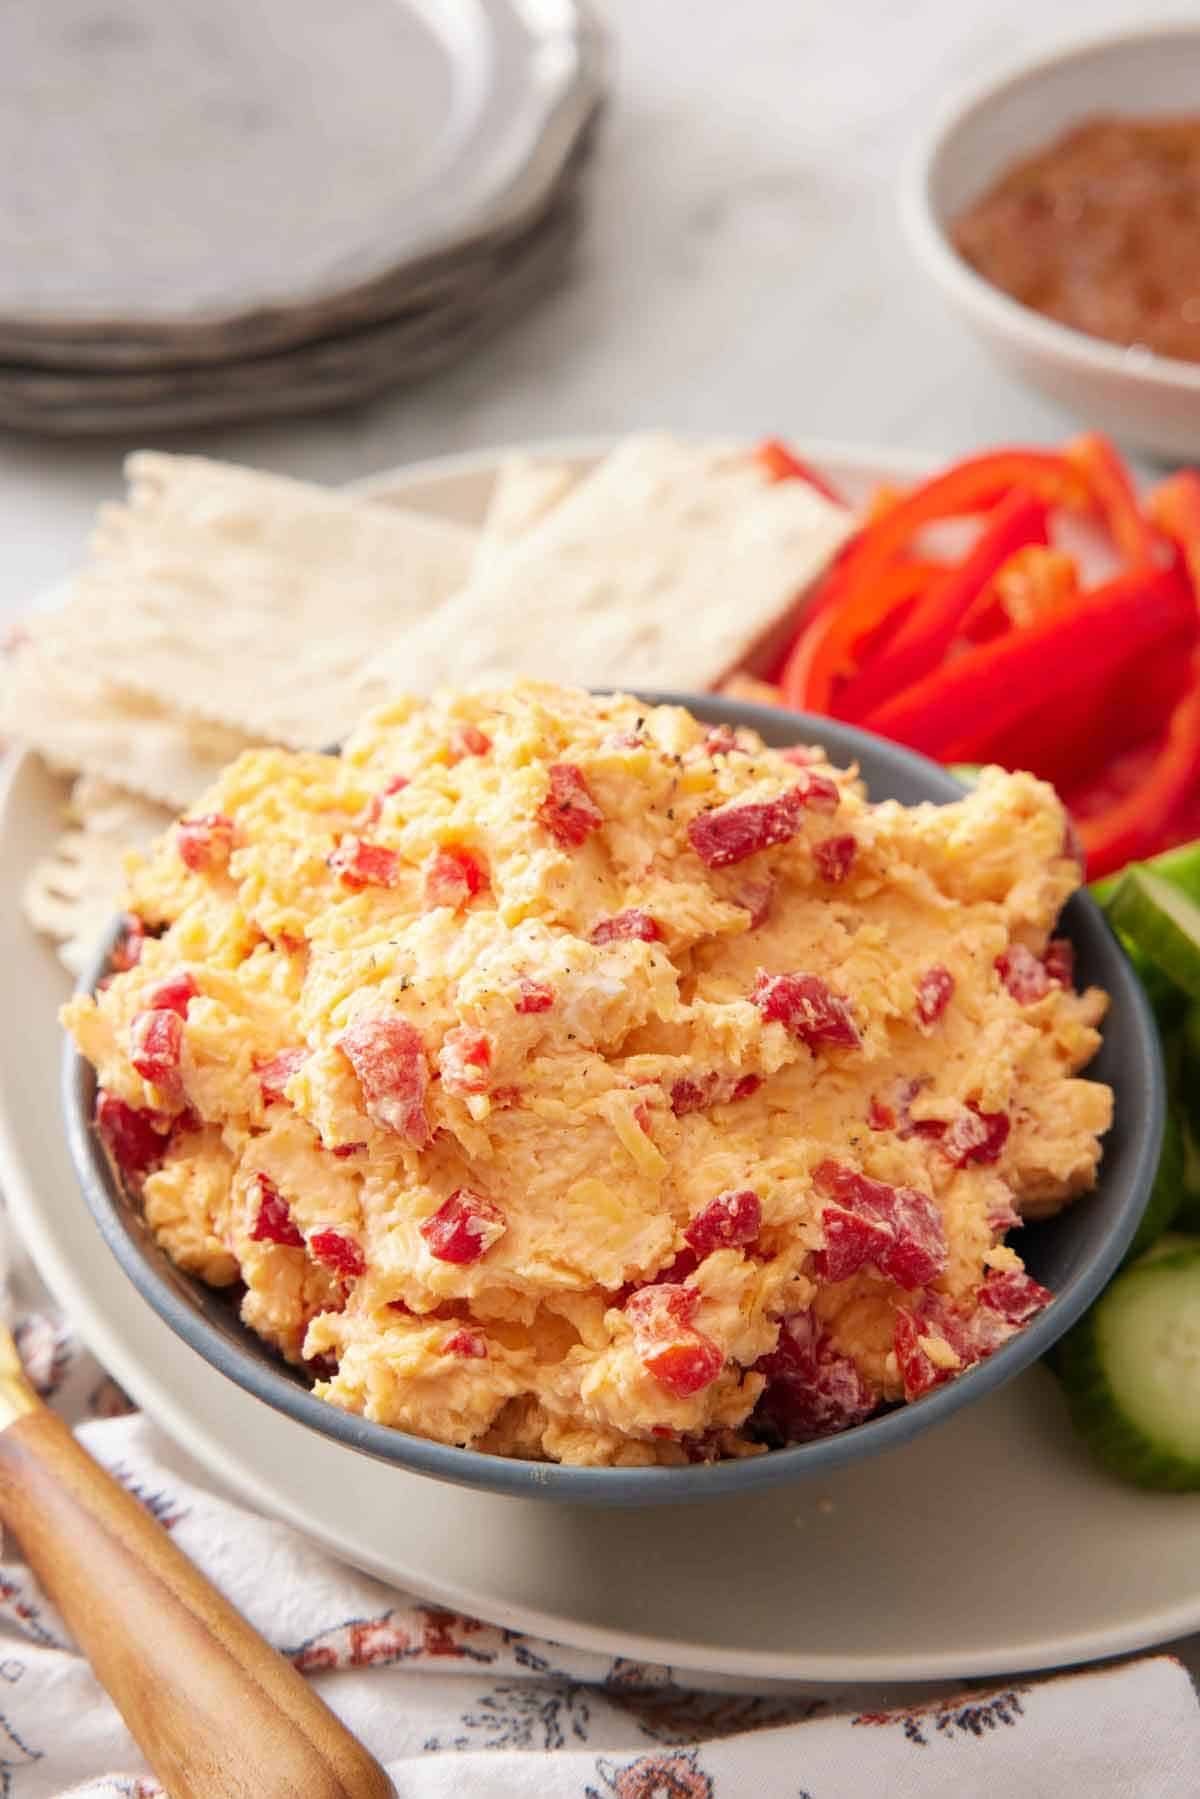 A bowl of pimento cheese along with some crackers, peppers, and cucumbers.